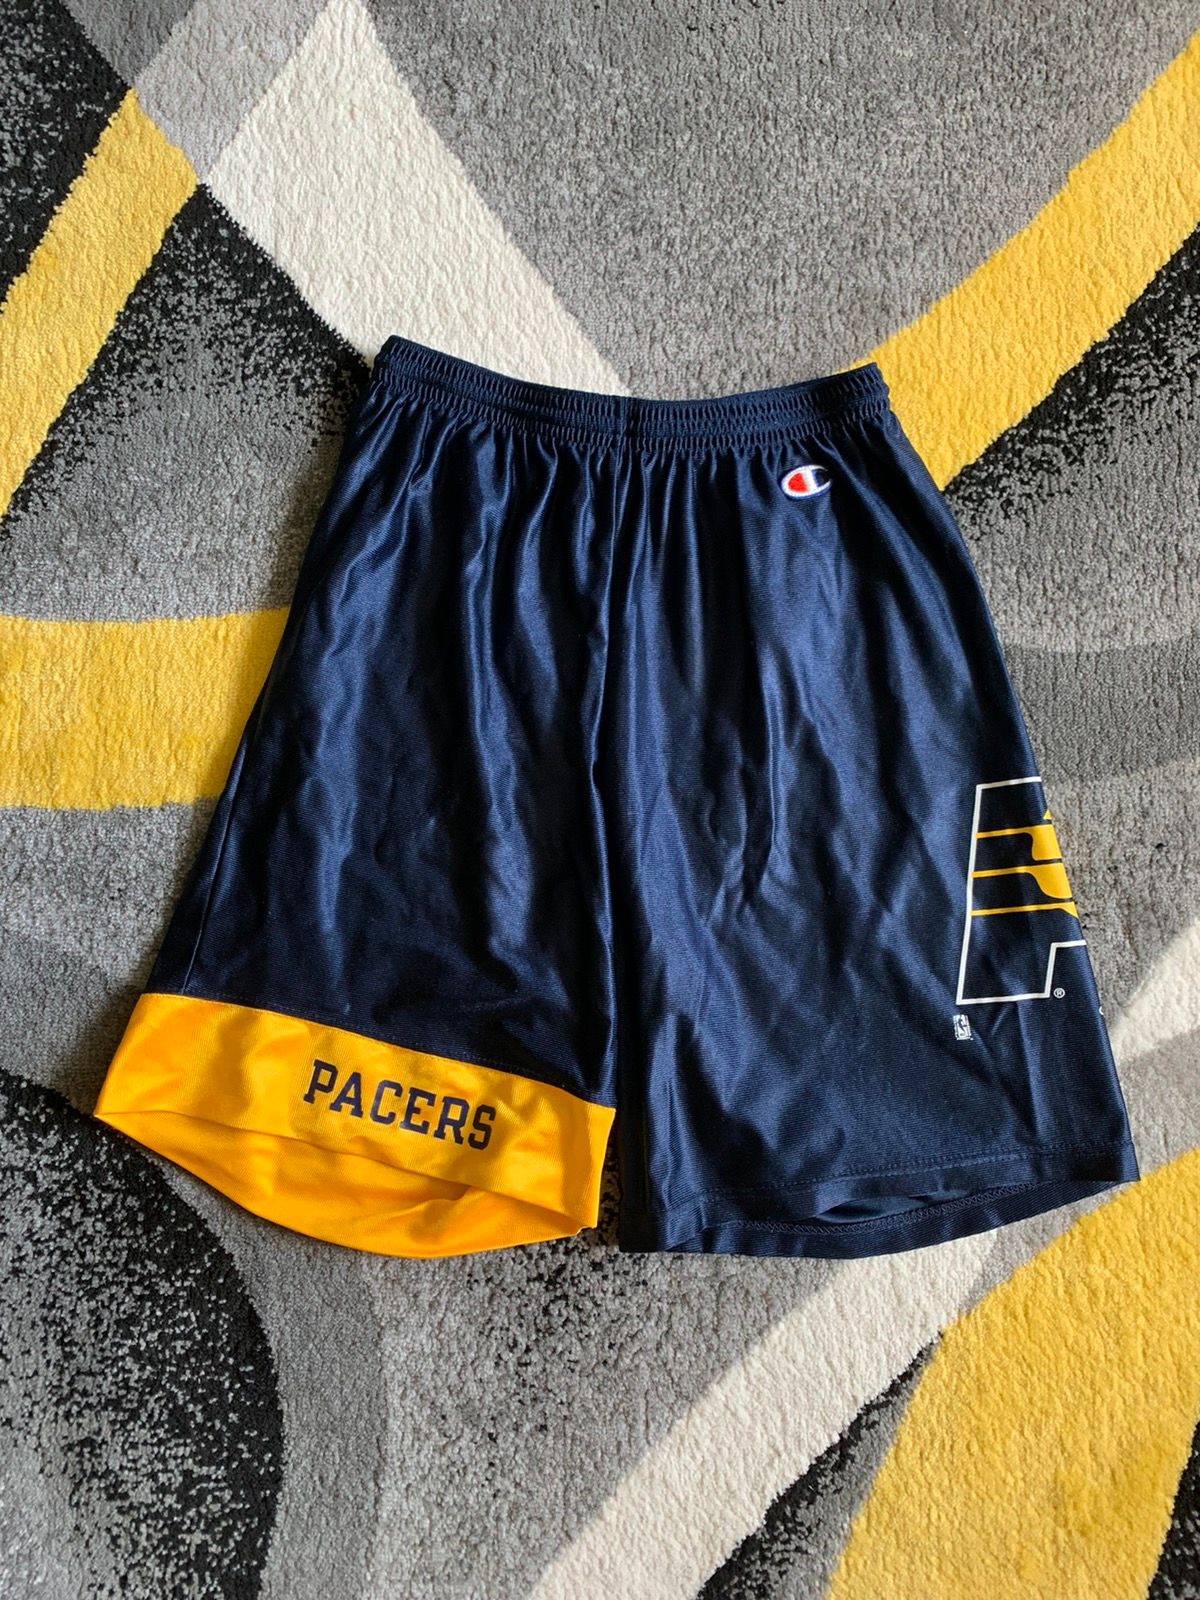 Vintage Indiana Pacer 90s Basketball Shorts Size US 30 / EU 46 - 1 Preview